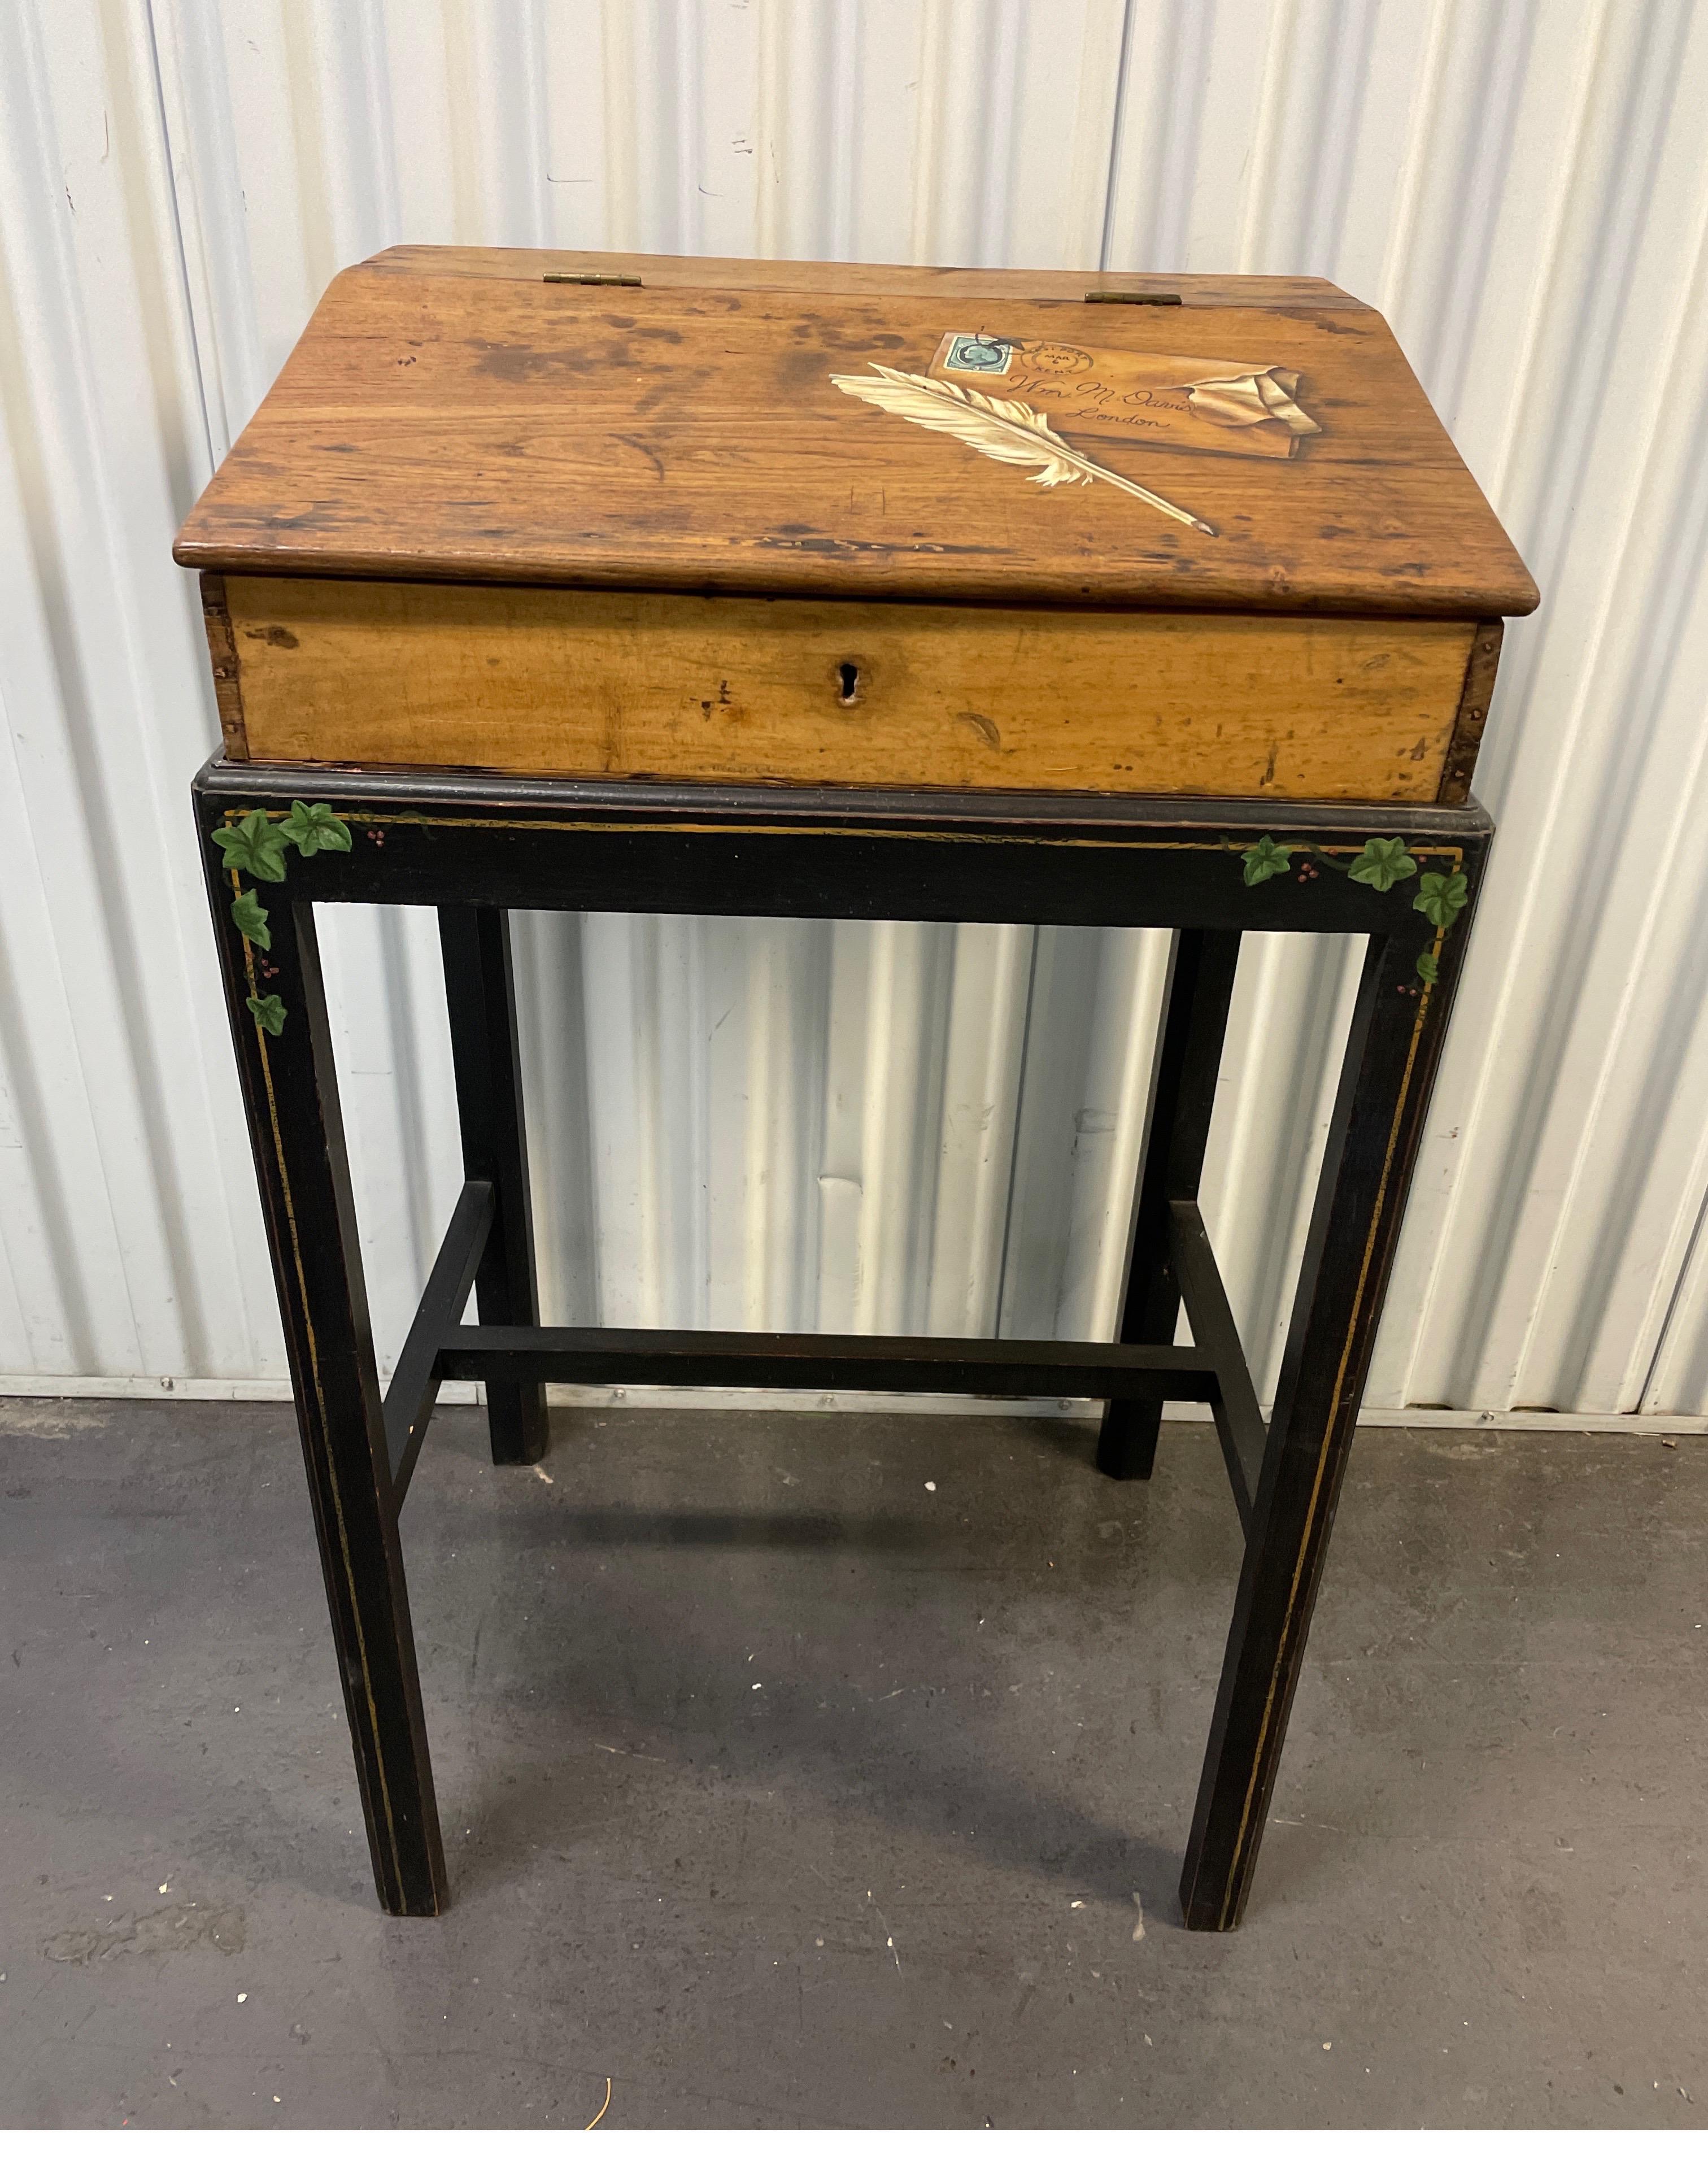 Charming Trompe L'0eil painted lap desk on stand. Top features a letter & quill pen. The legs of stand have hand painted ivy. Top hinges open to storage compartment.